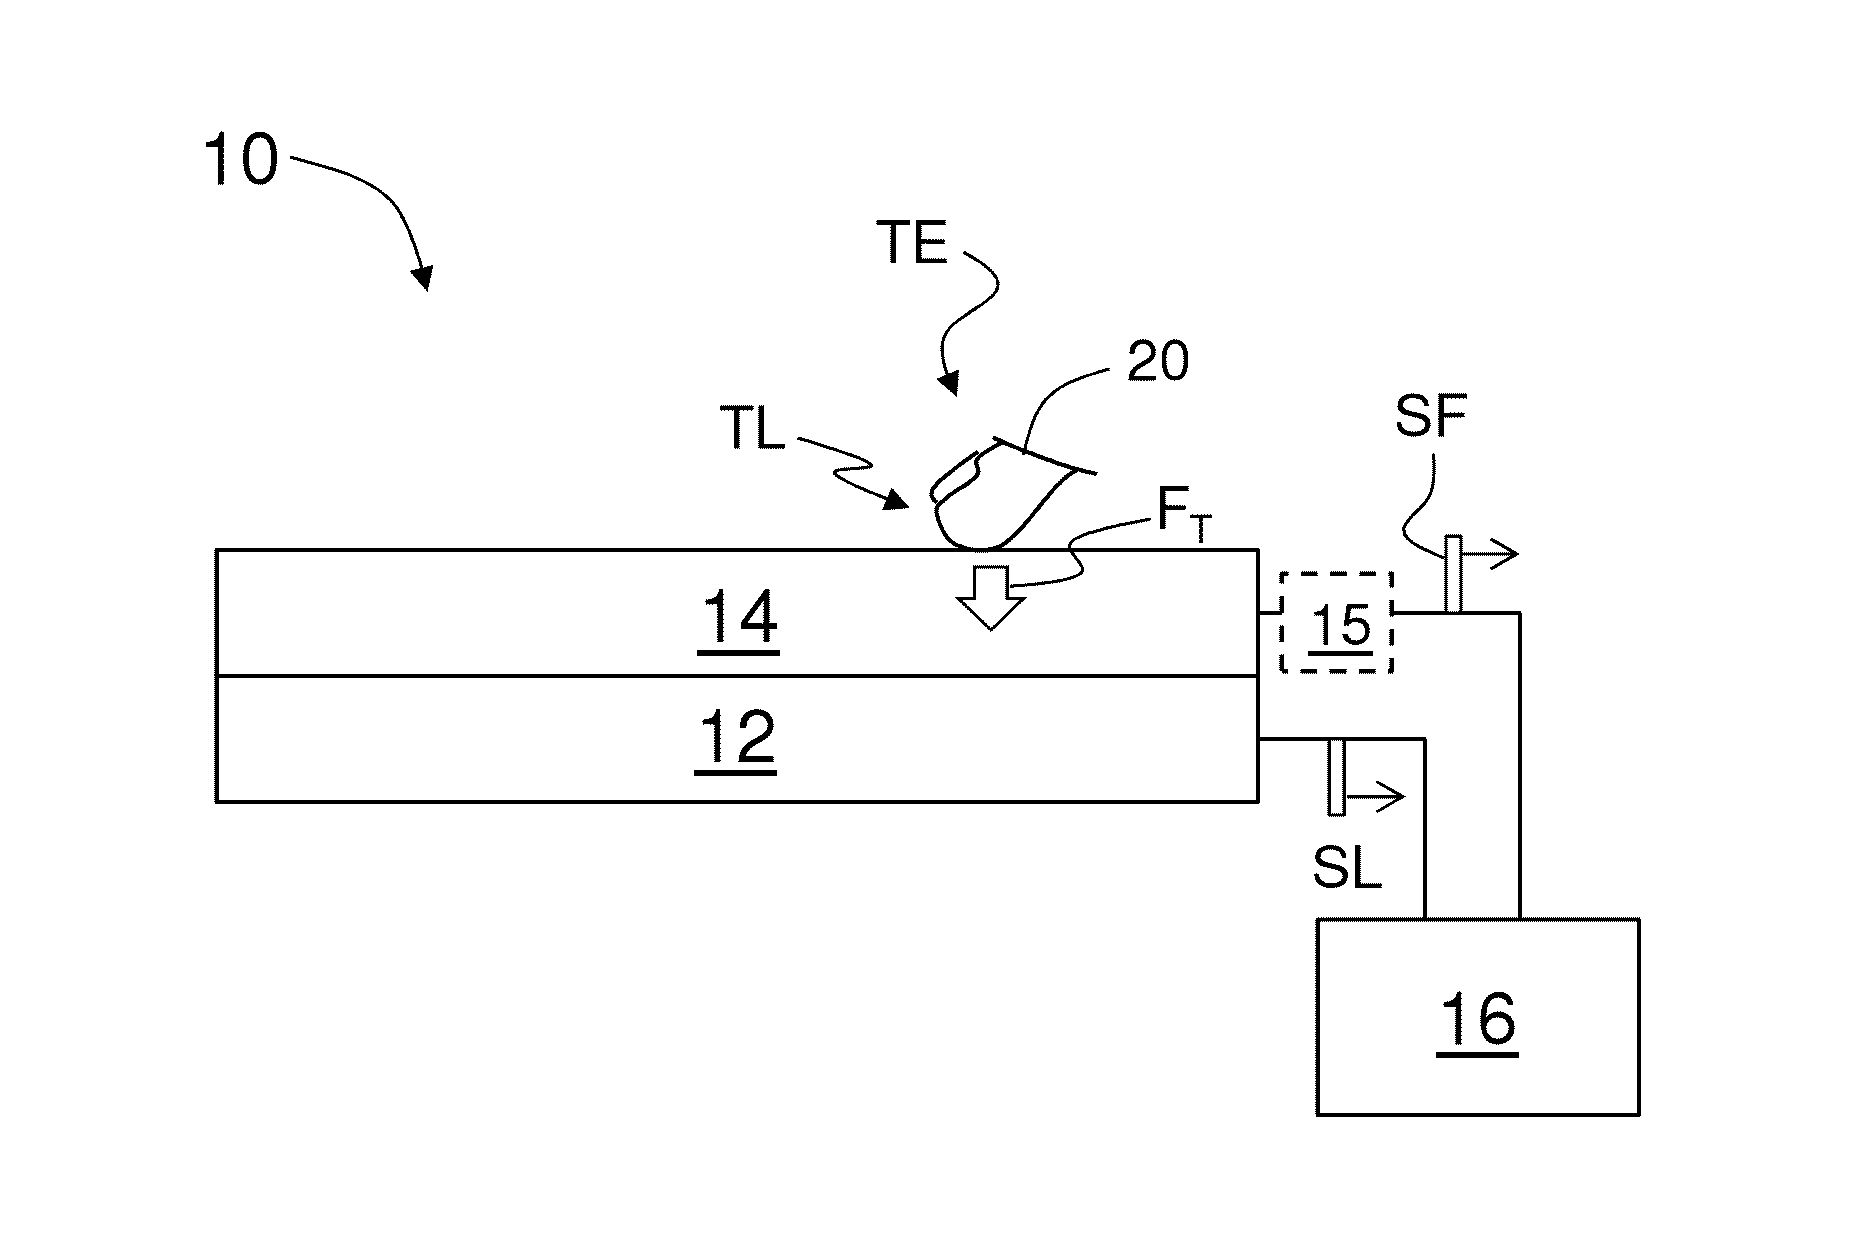 Touch screen systems and methods based on touch location and touch force